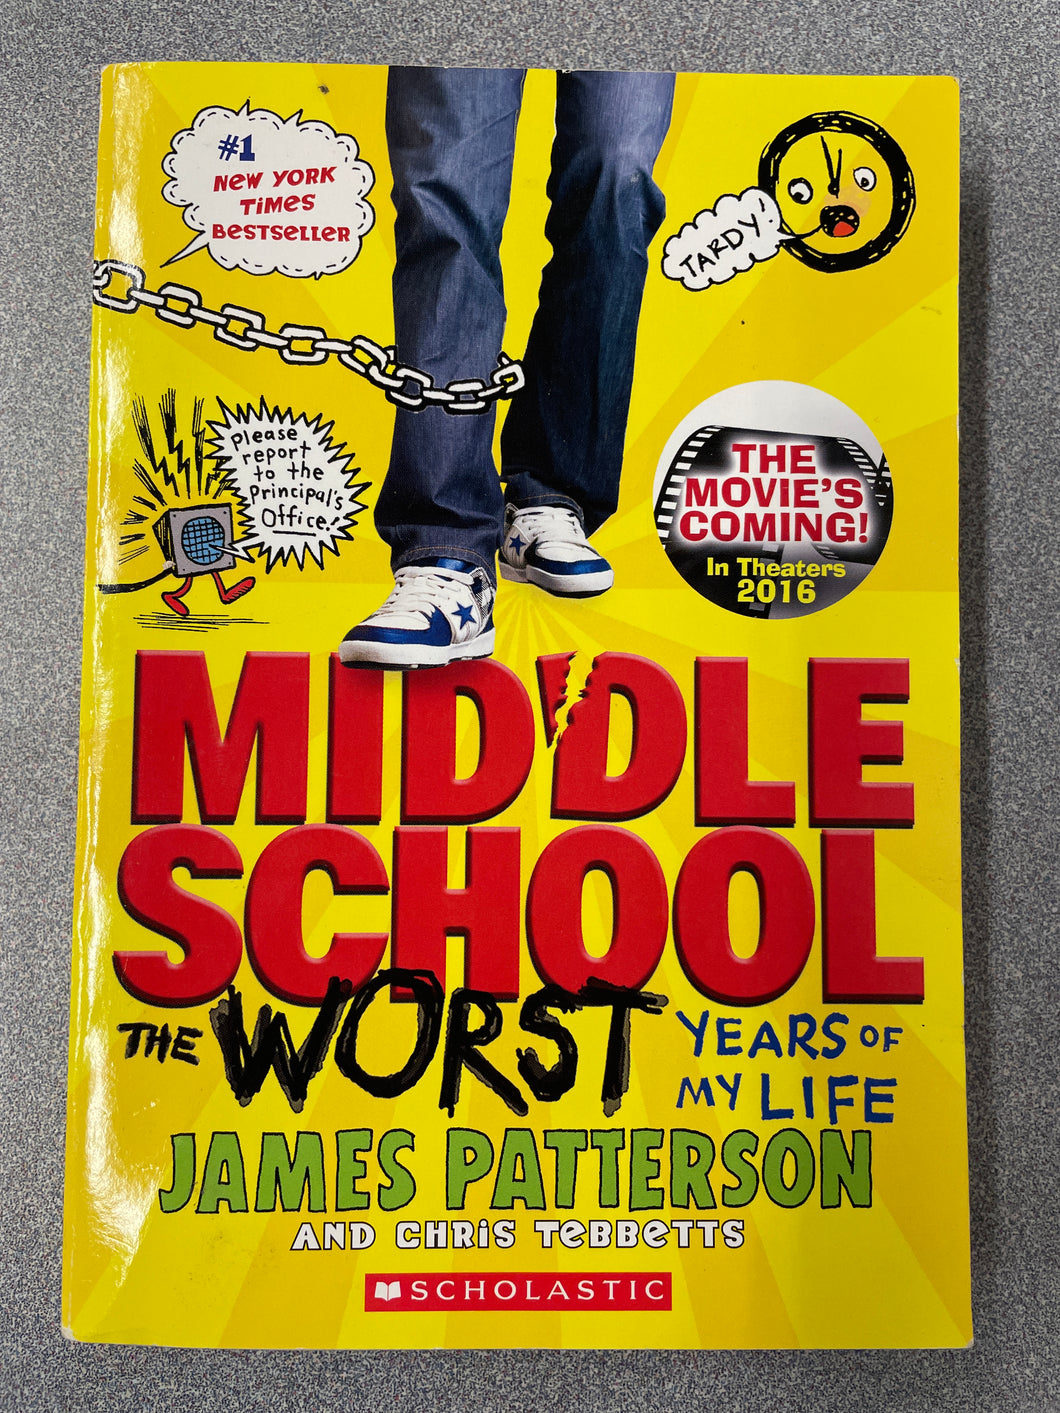 Patterson, James and Chris Tebbetts, Middle School: the Worst Years of My Life [2011] YF 12/23